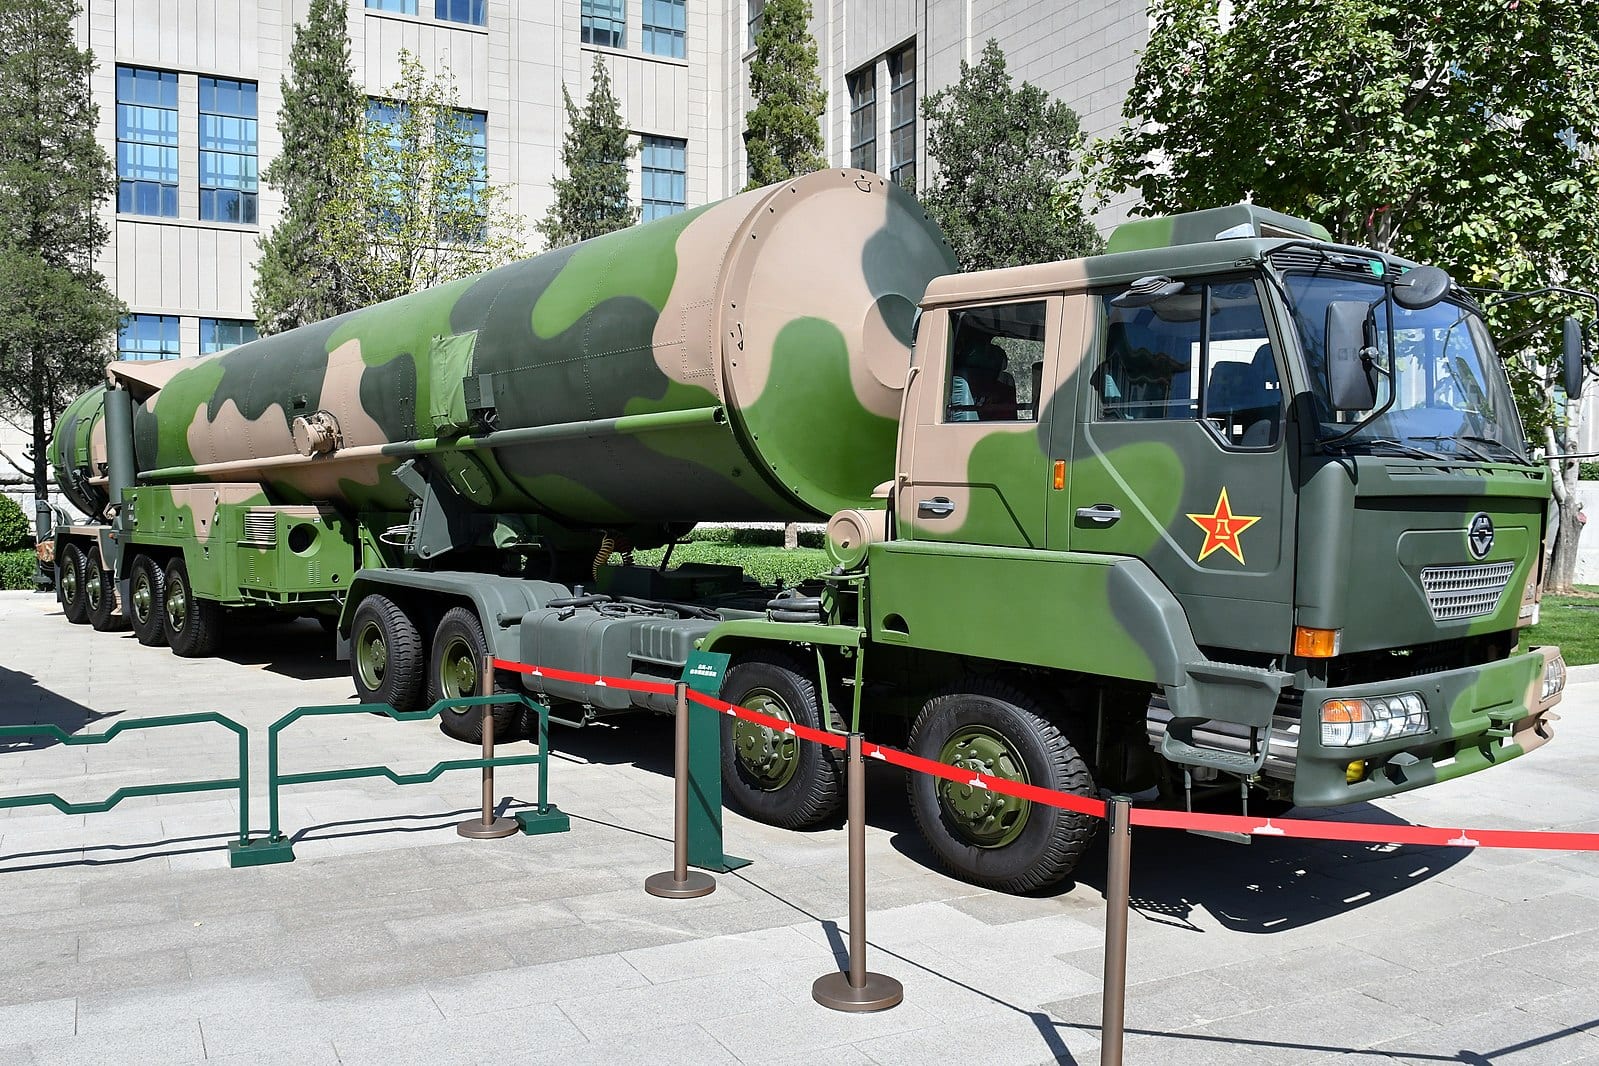 PERSPECTIVE: China's Nuclear Weapons May Very Well Contain American